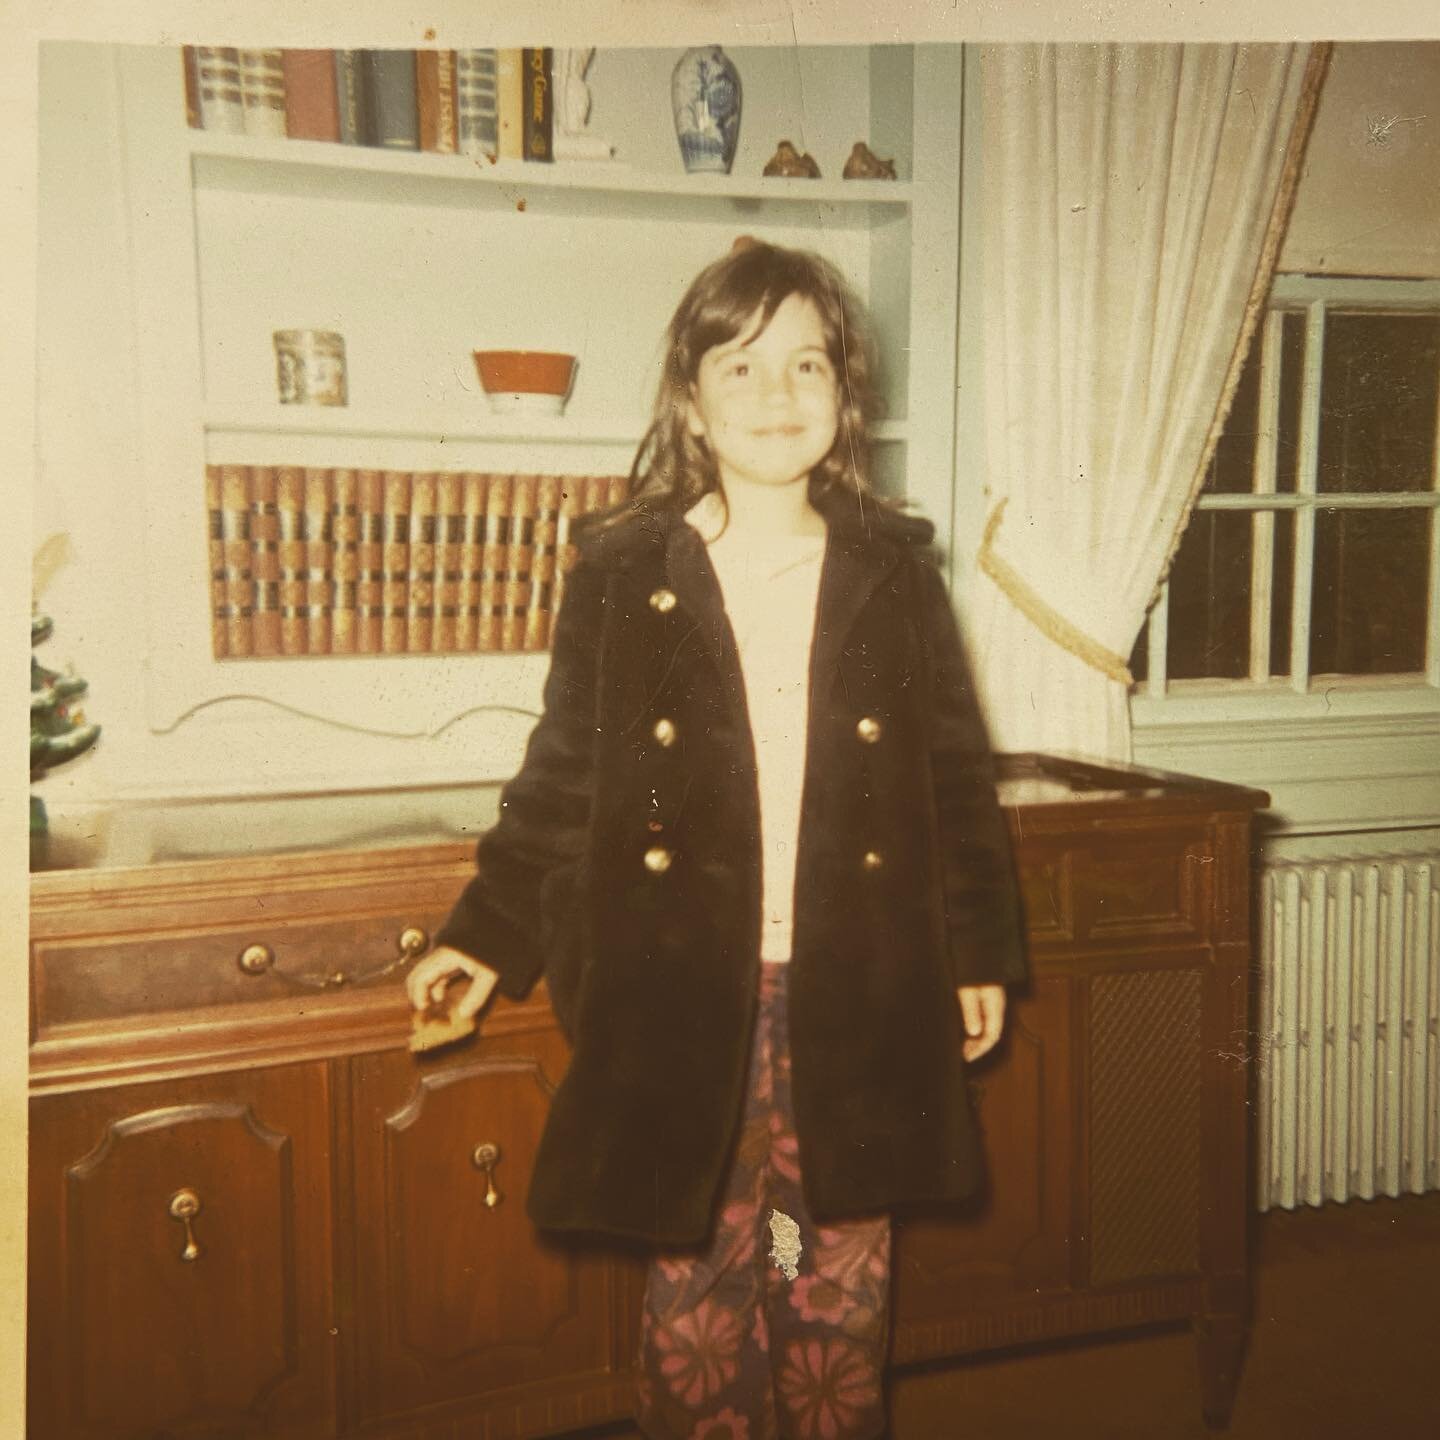 badass ragamuffin eating coffee cake in a chilly New England living room thus wearing a coat in front of the stereo console which is undoubtedly playing the Godspell soundtrack at age just about to turn 7.